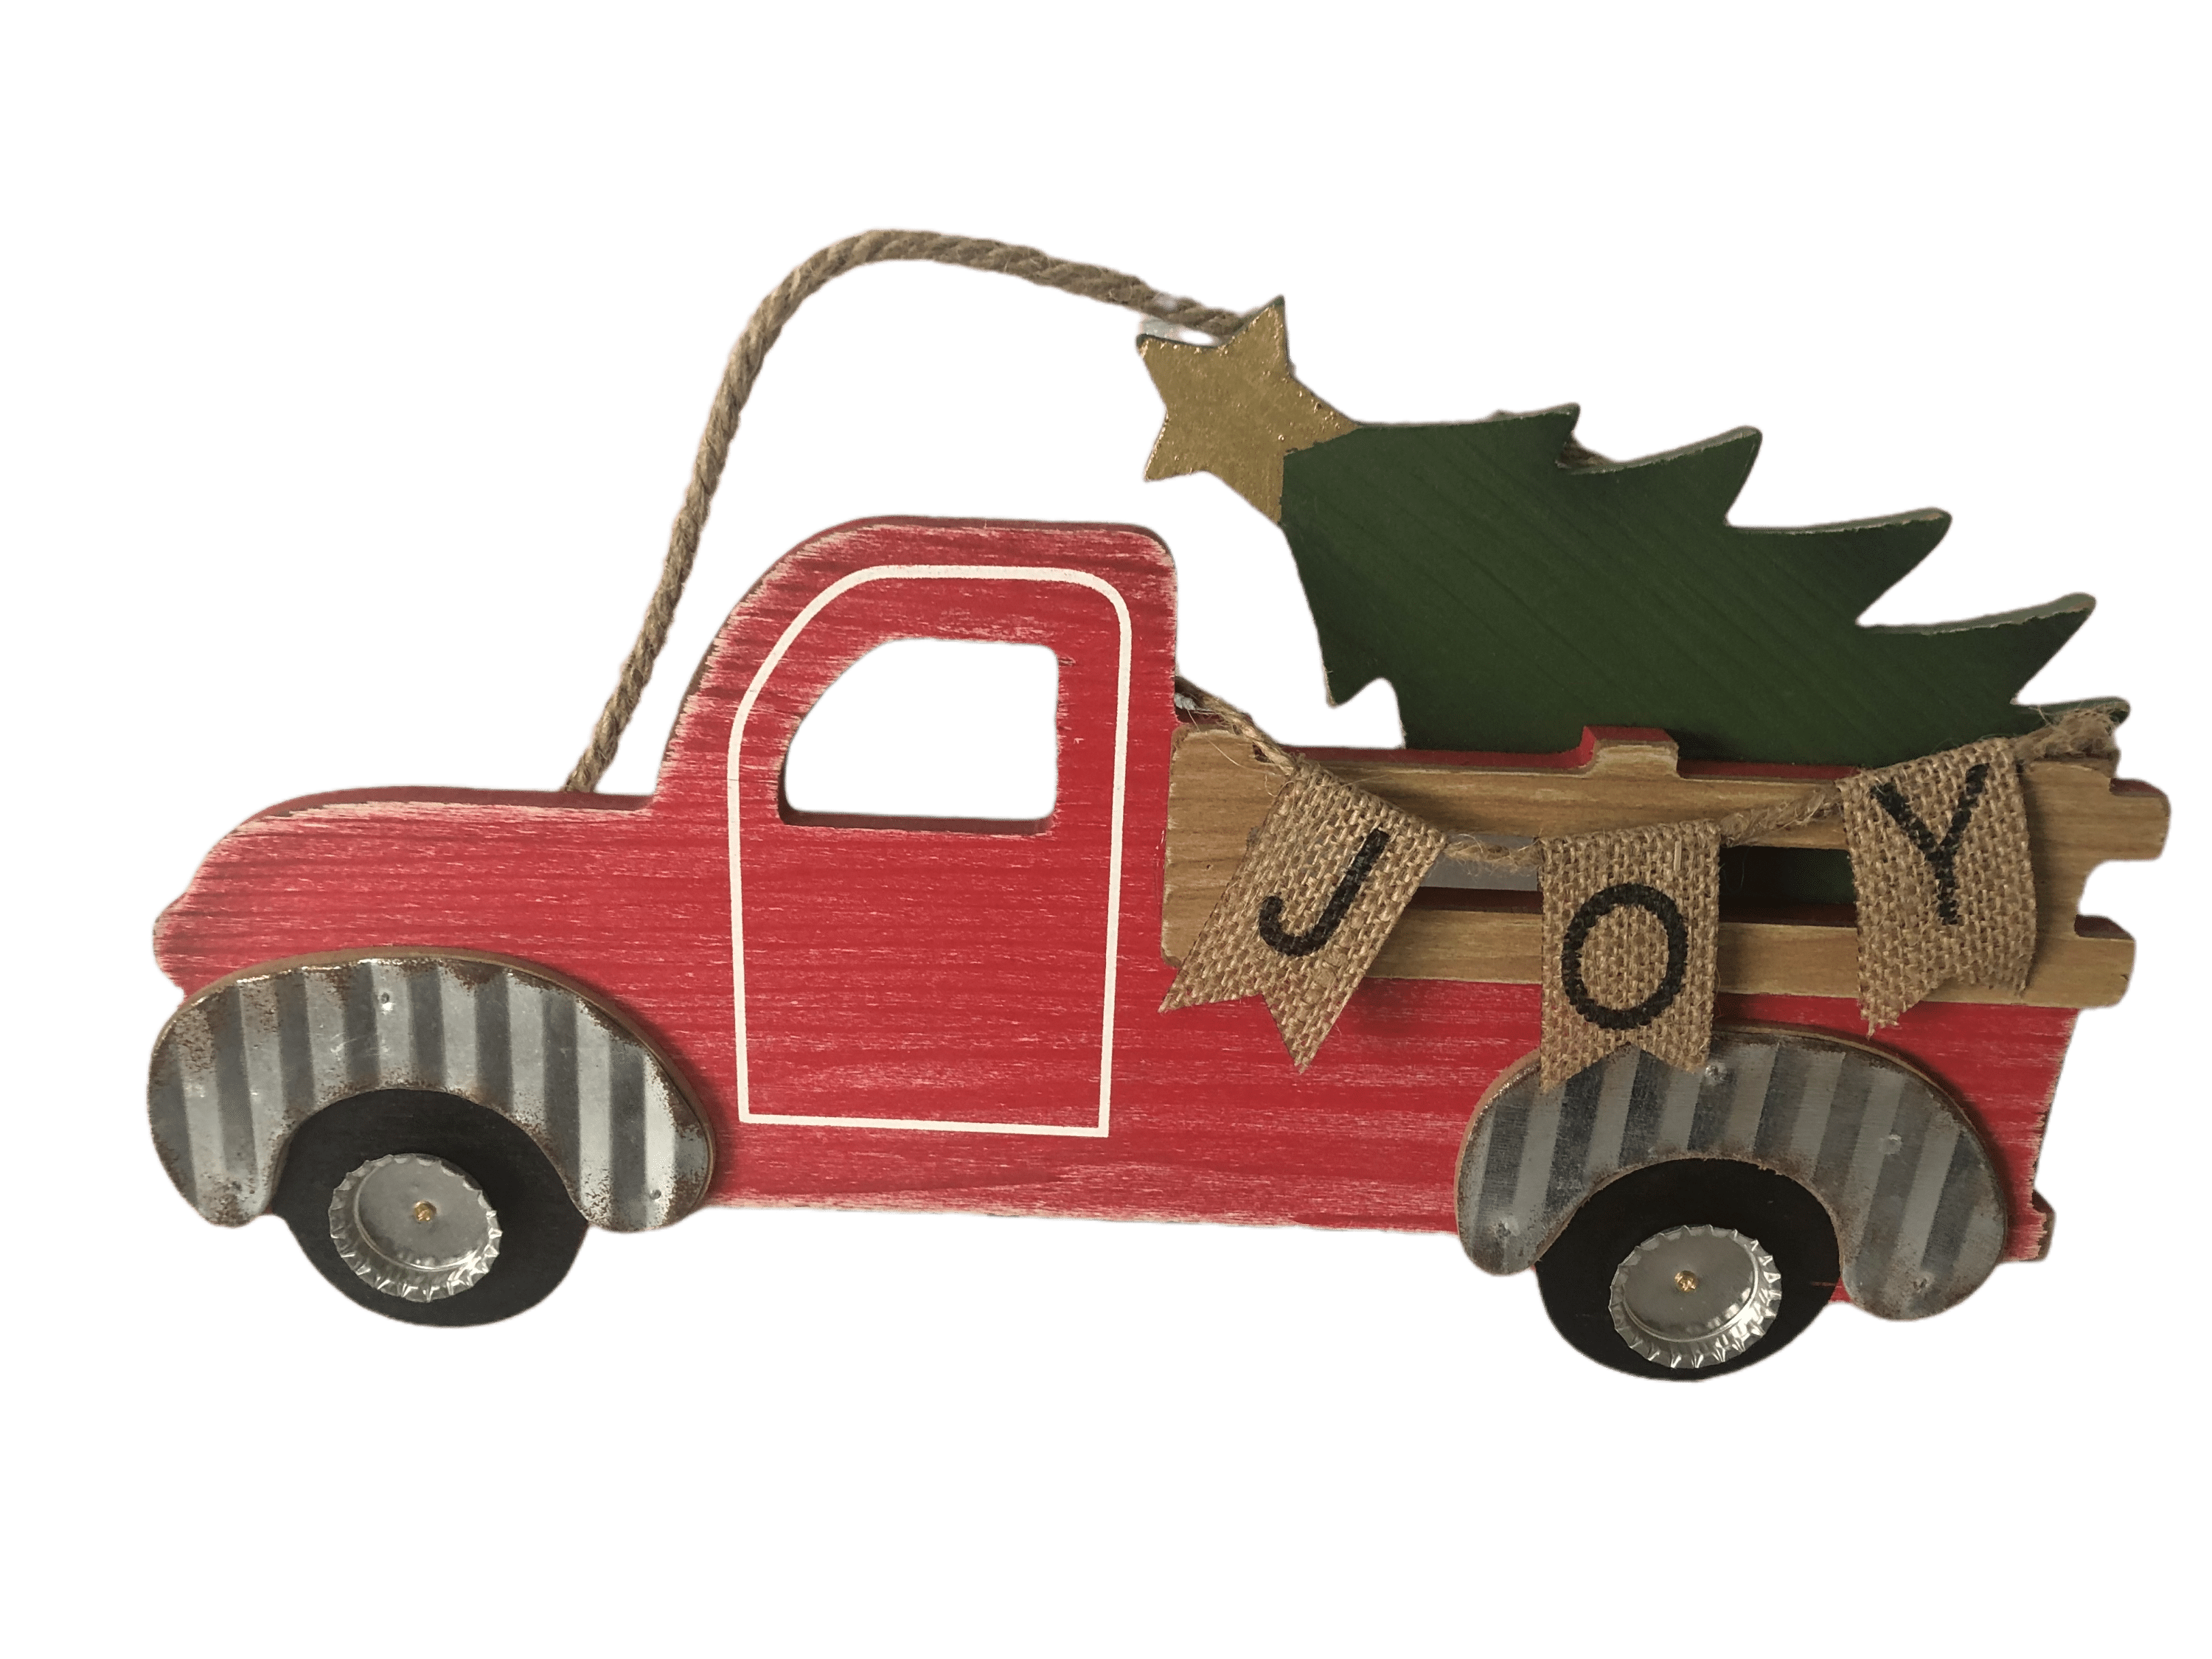 NEW WOOD & TIN  MERRY CHRISTMAS TRUCK  WITH TREES WALL DECOR 12 1/2 W X 10 1/2 H 